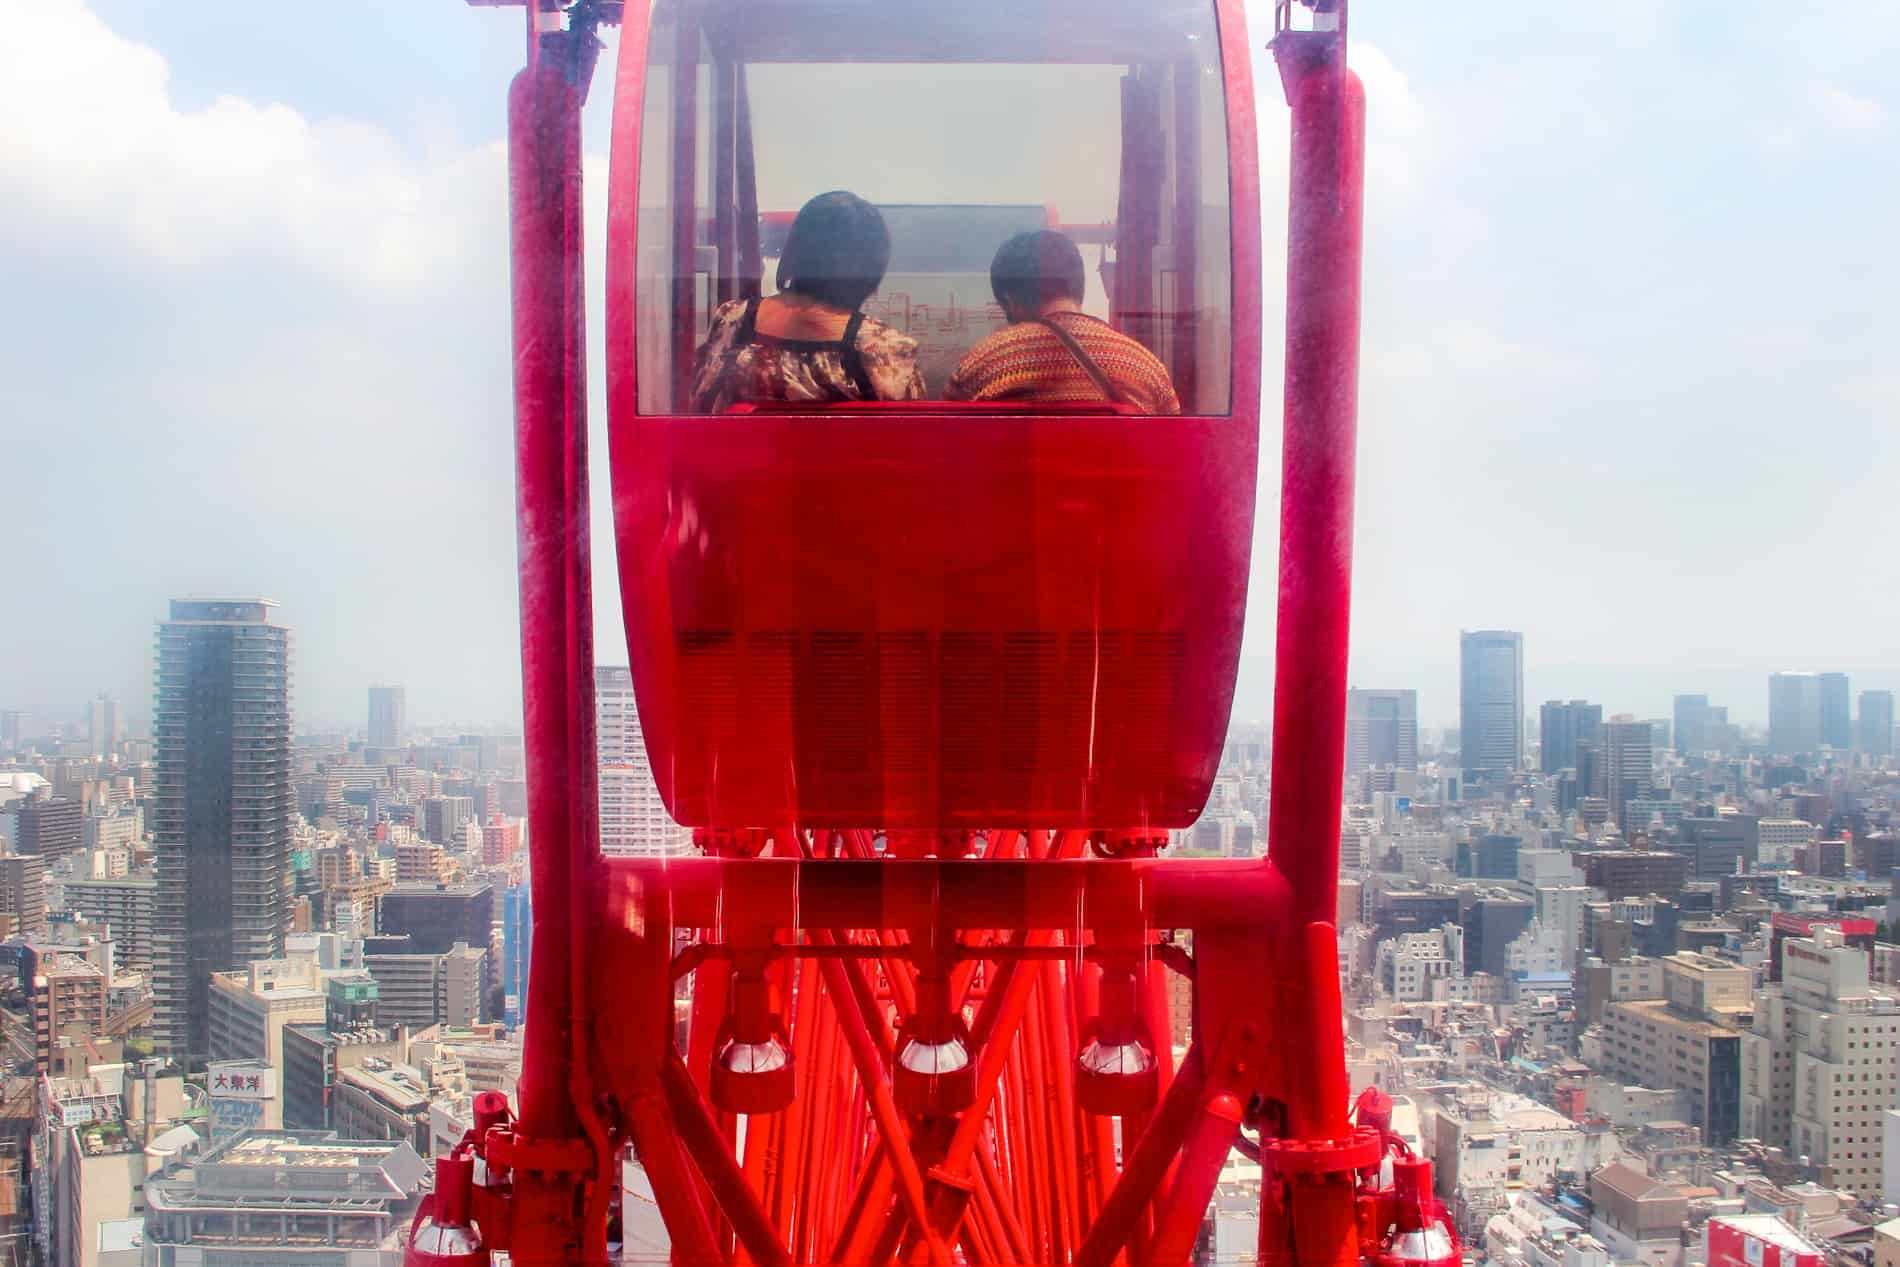 View into the red carriage of a Ferris Wheel carrying two passengers as it hovers above the city skyline of Osaka, Japan. 